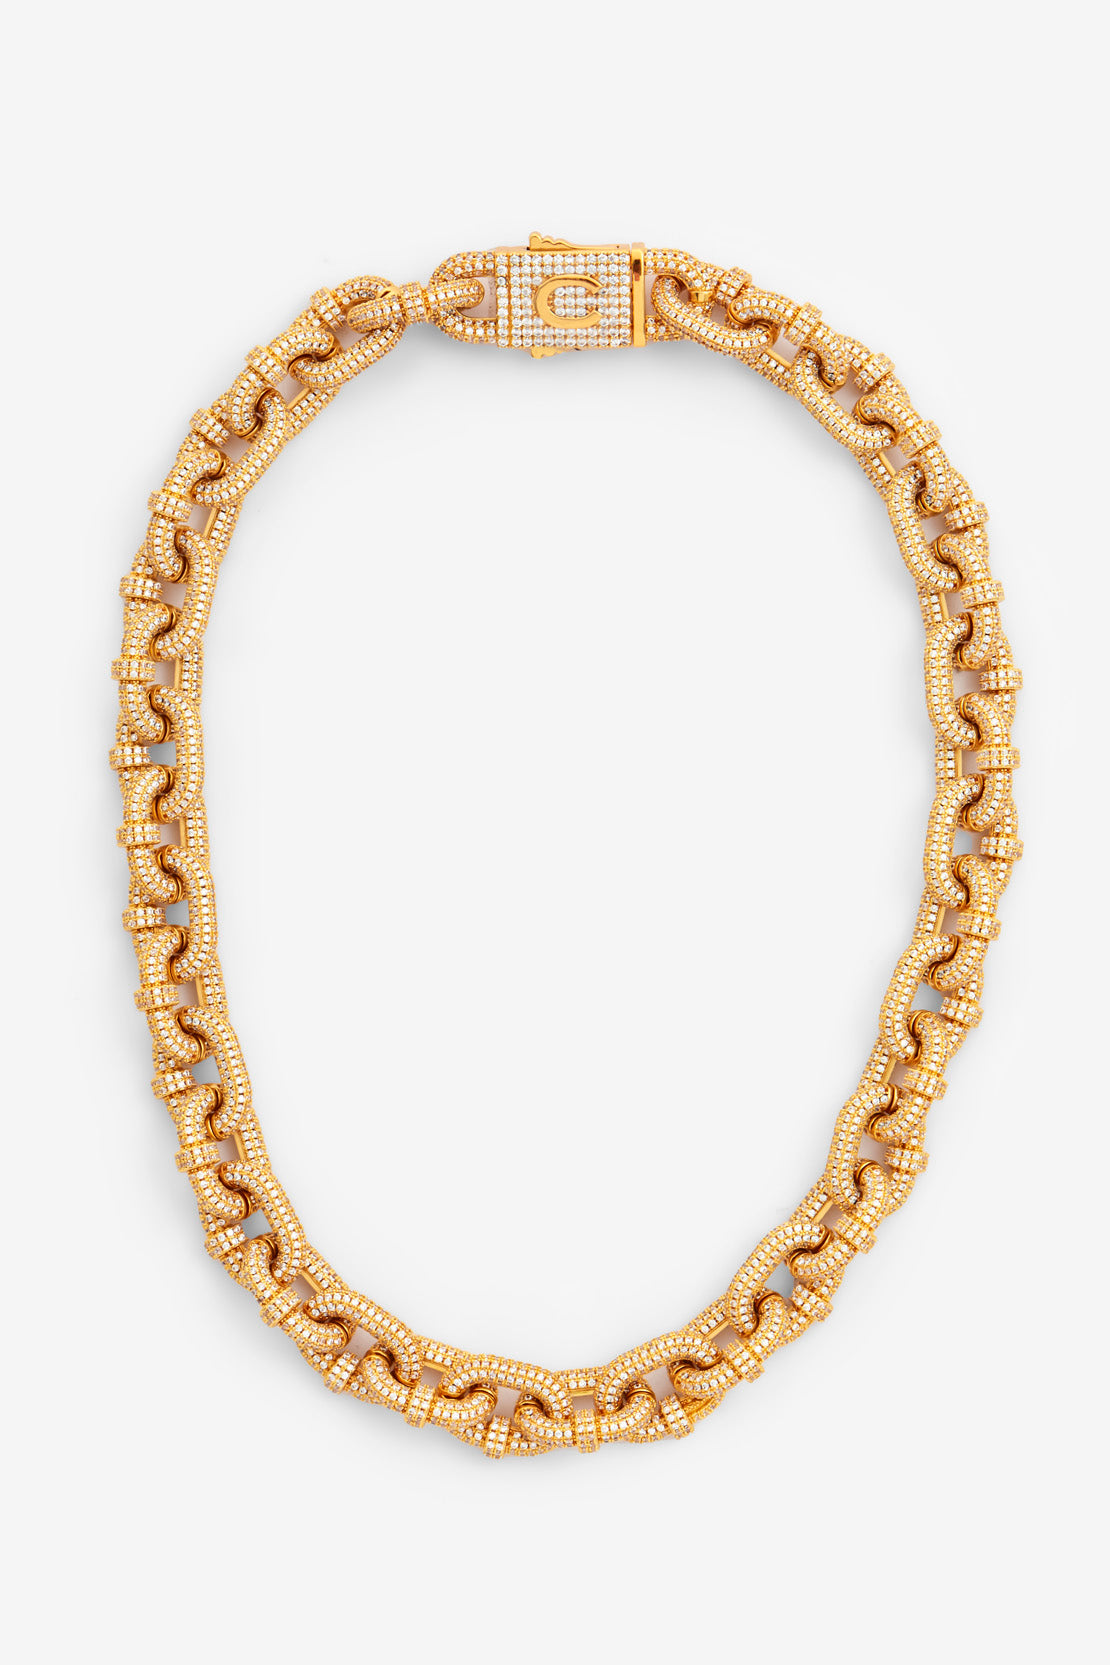 14mm Iced Chunky Link Pave Chain - Gold – Cernucci